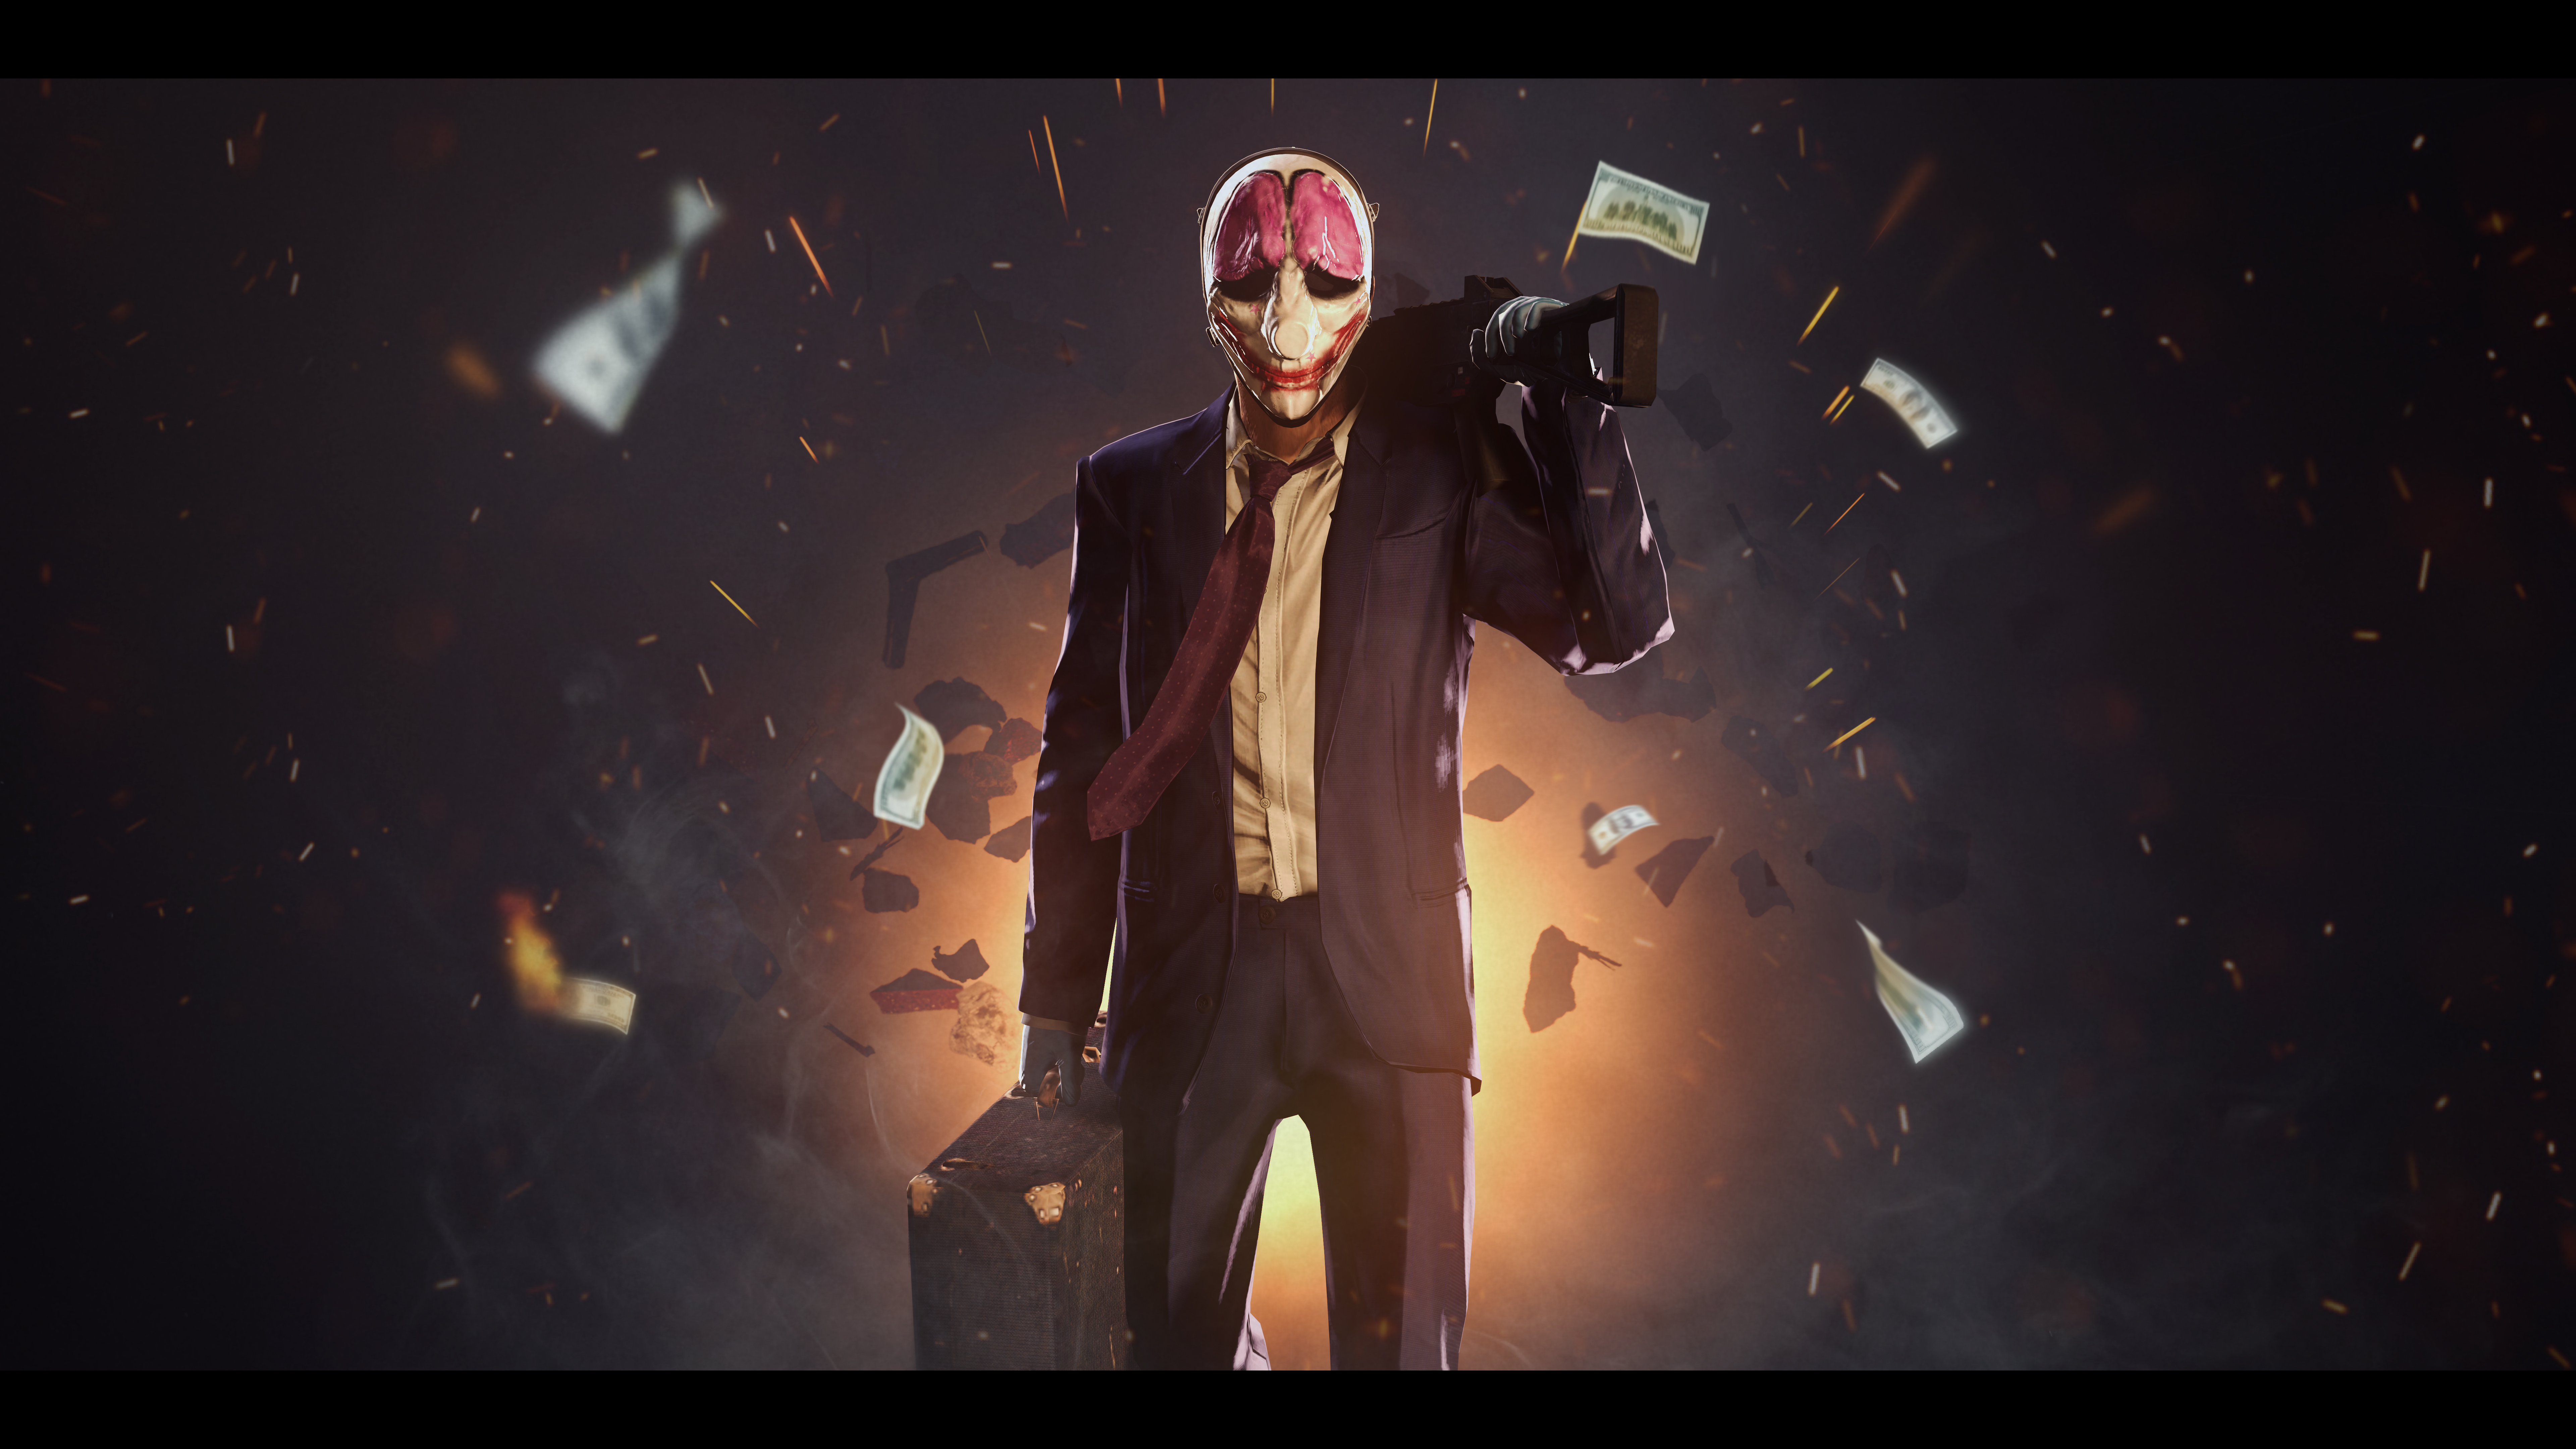 Hoxton Payday 7680x4320